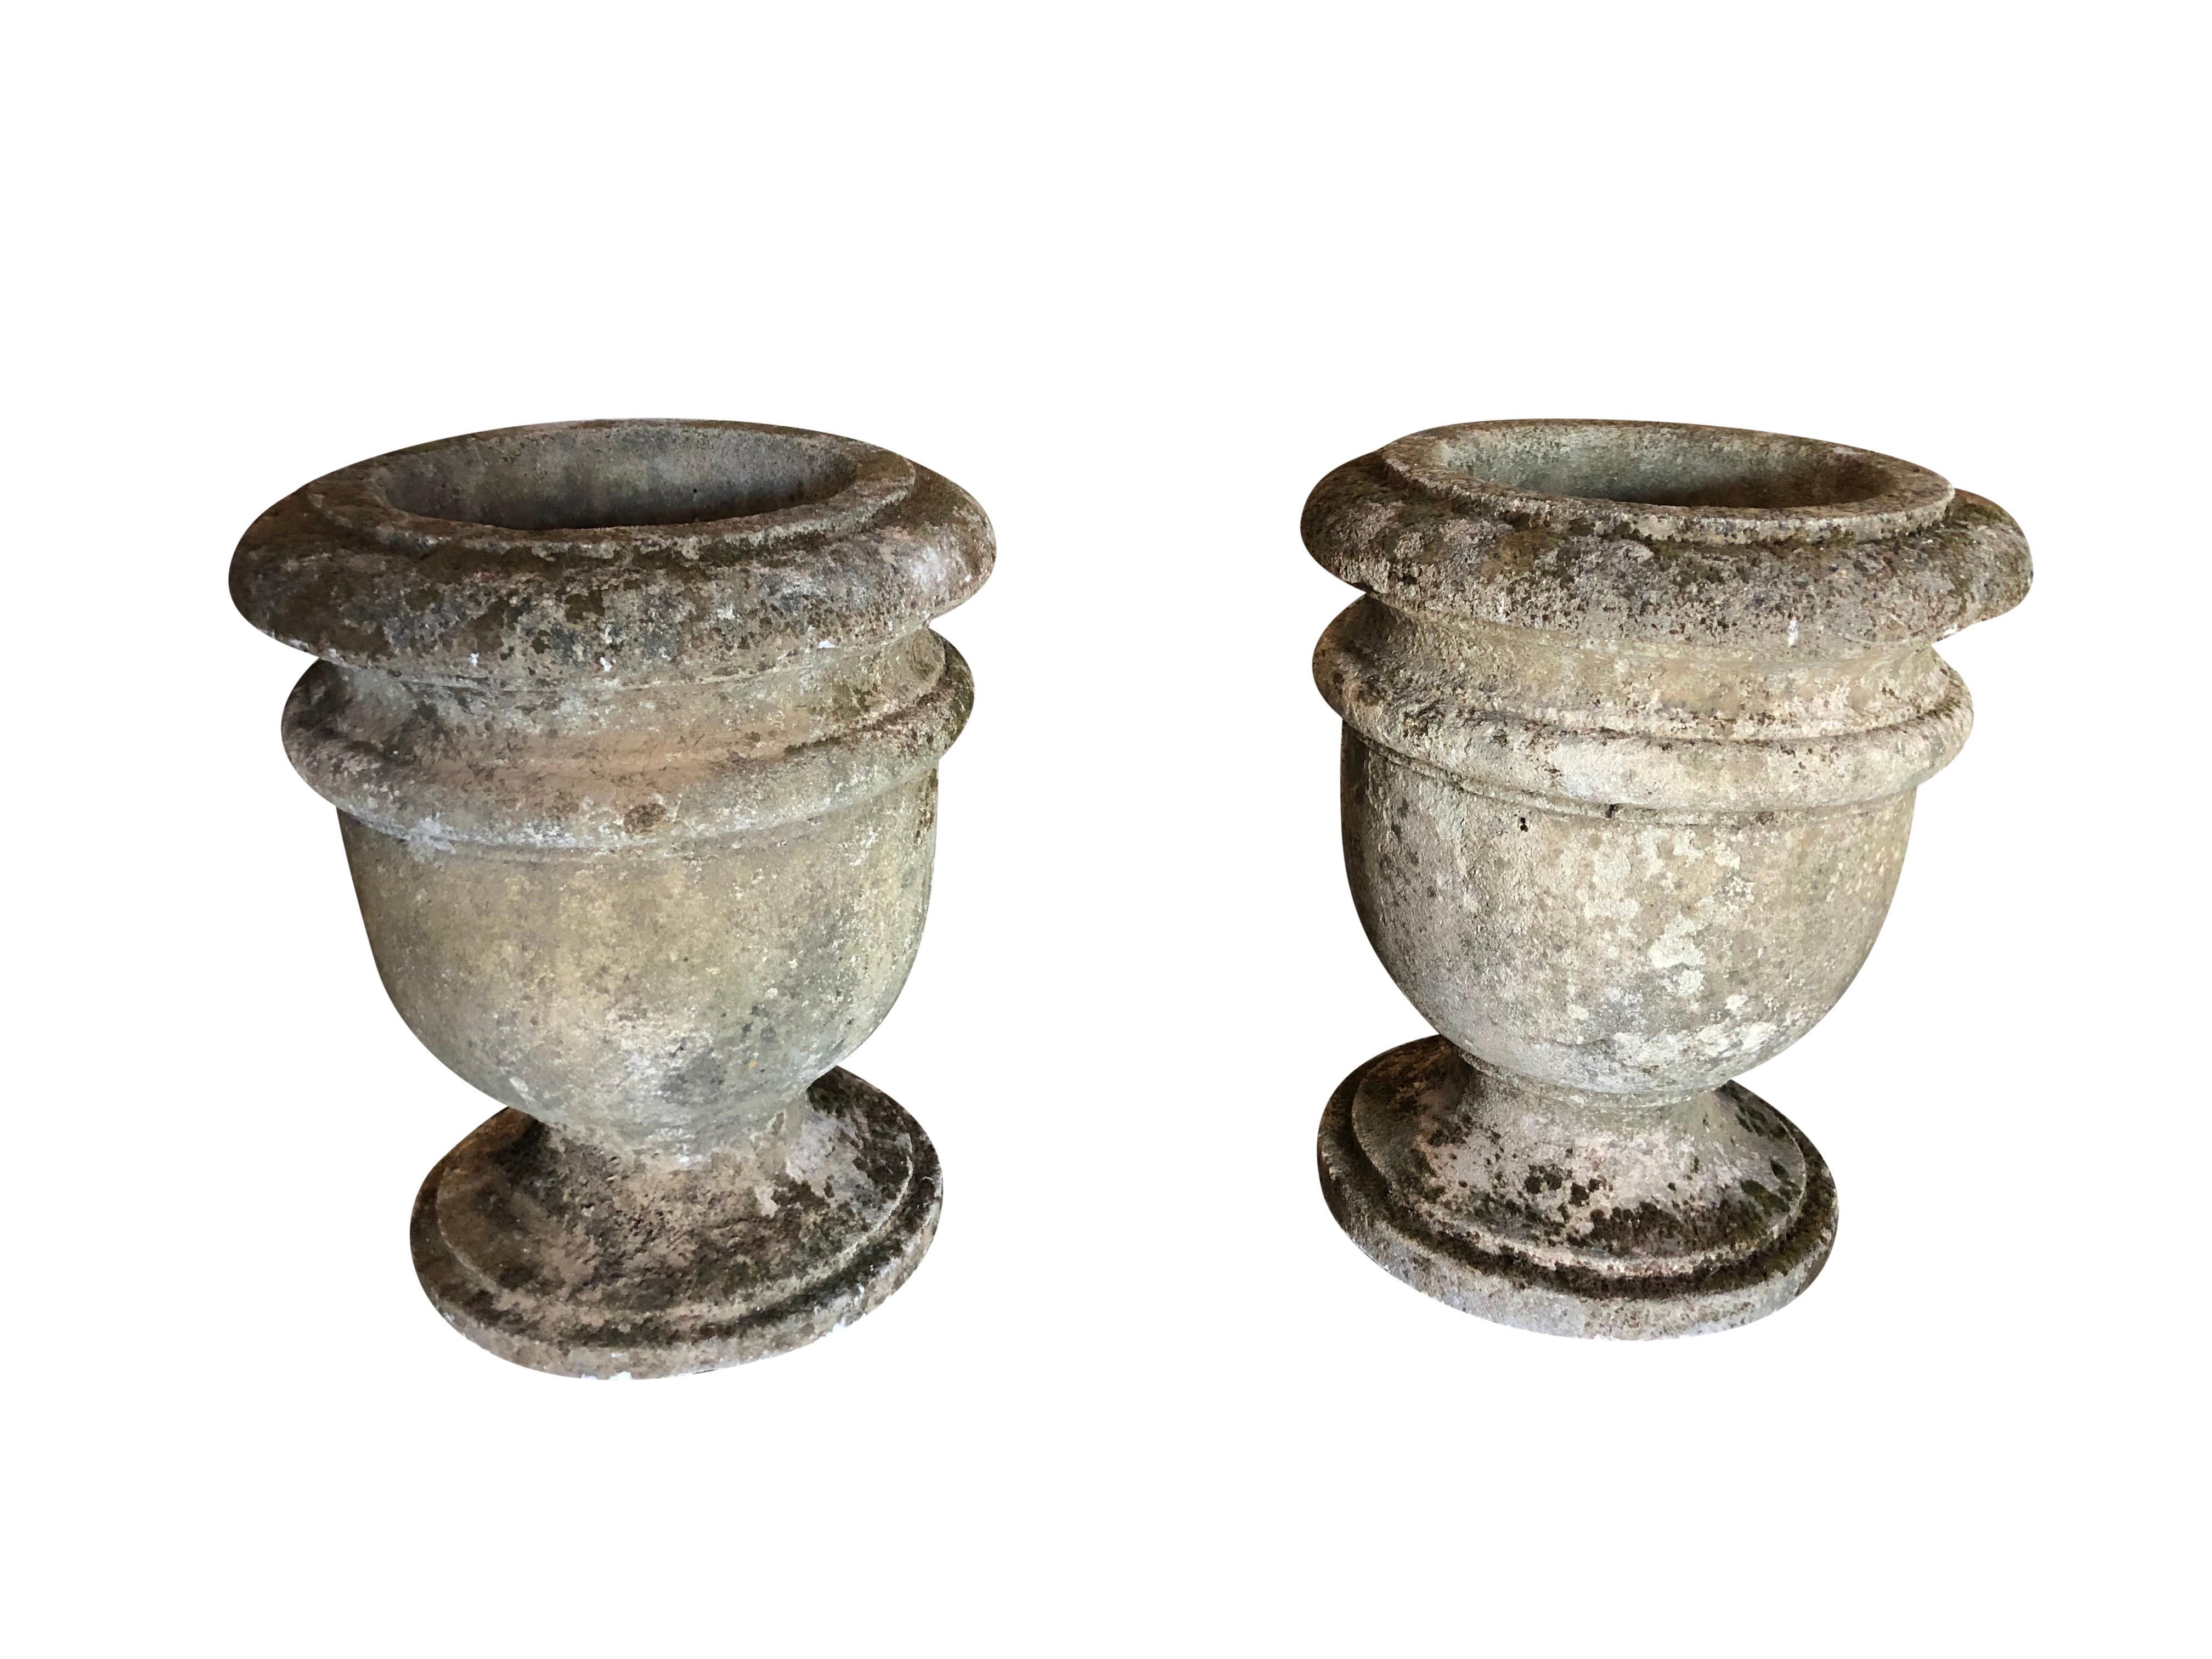 Early 19th century, a pair of hand carved French limestone garden urns raised on a circular foot and original patina. Wear and use consistent with age, circa 1840 prov. Loire Valley in France.